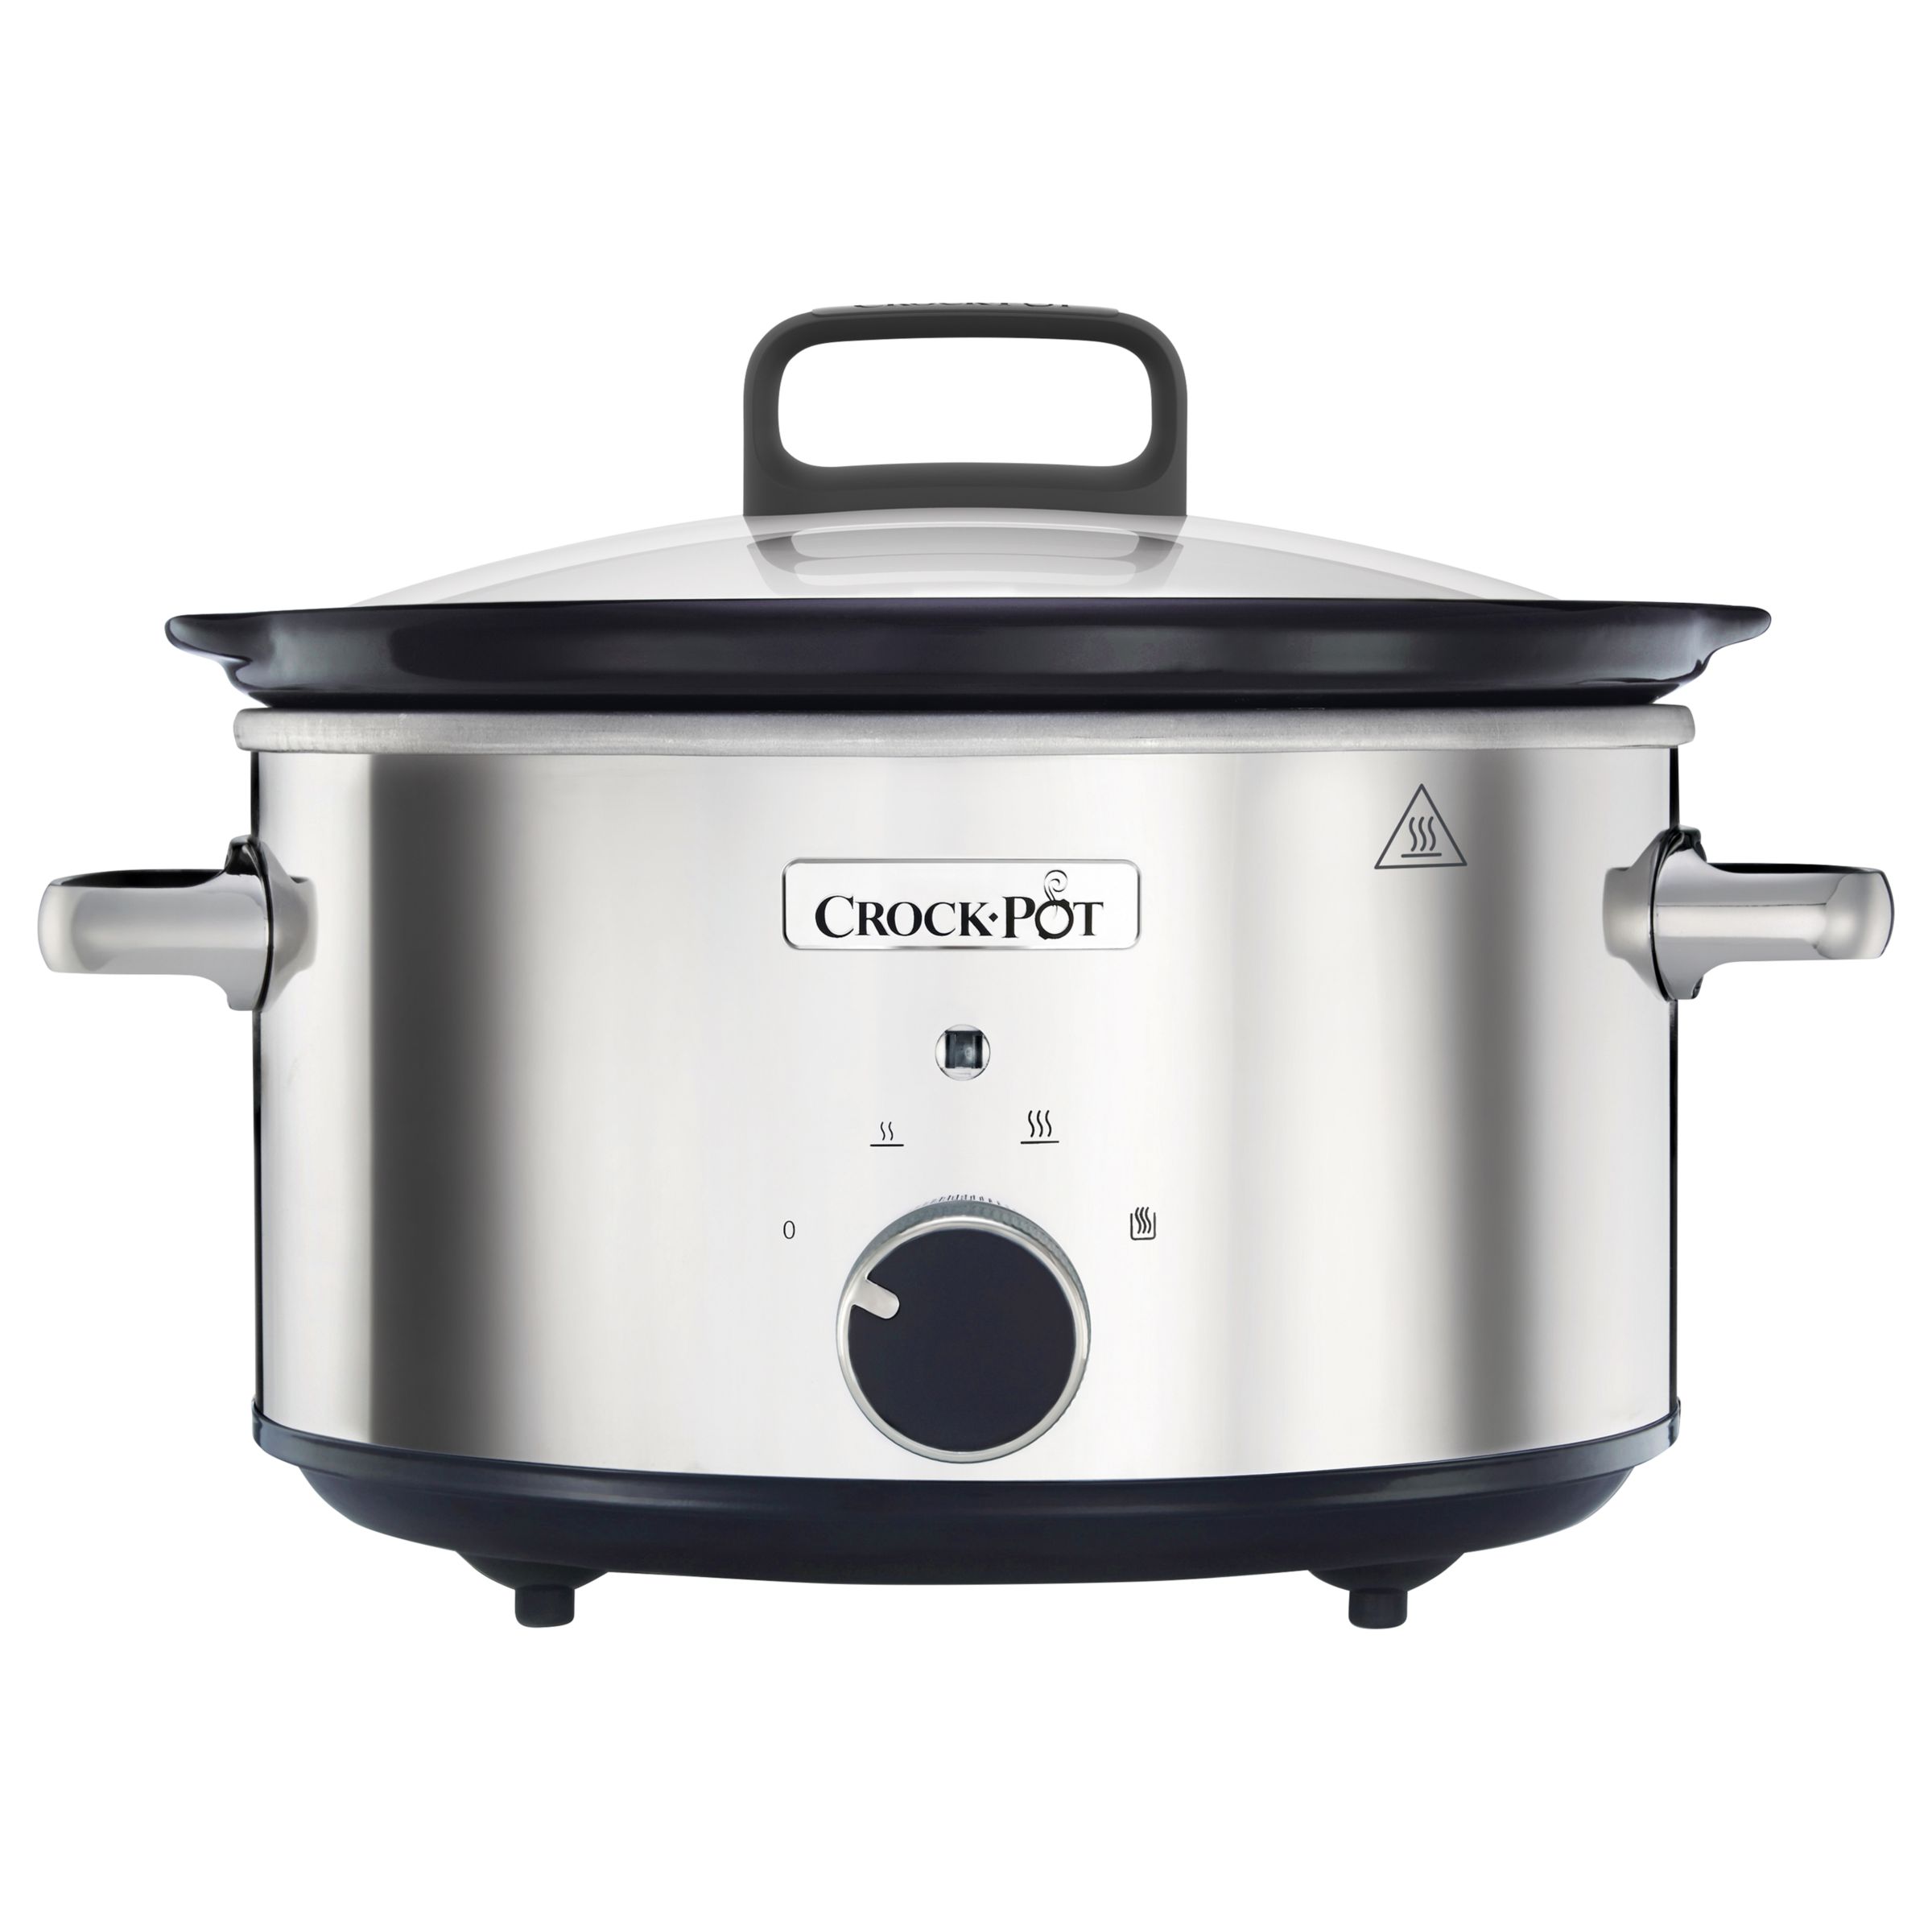 Crock Pot Csc032 Manual 3 5 Litres Slow Cooker Stainless Steel At John Lewis Partners